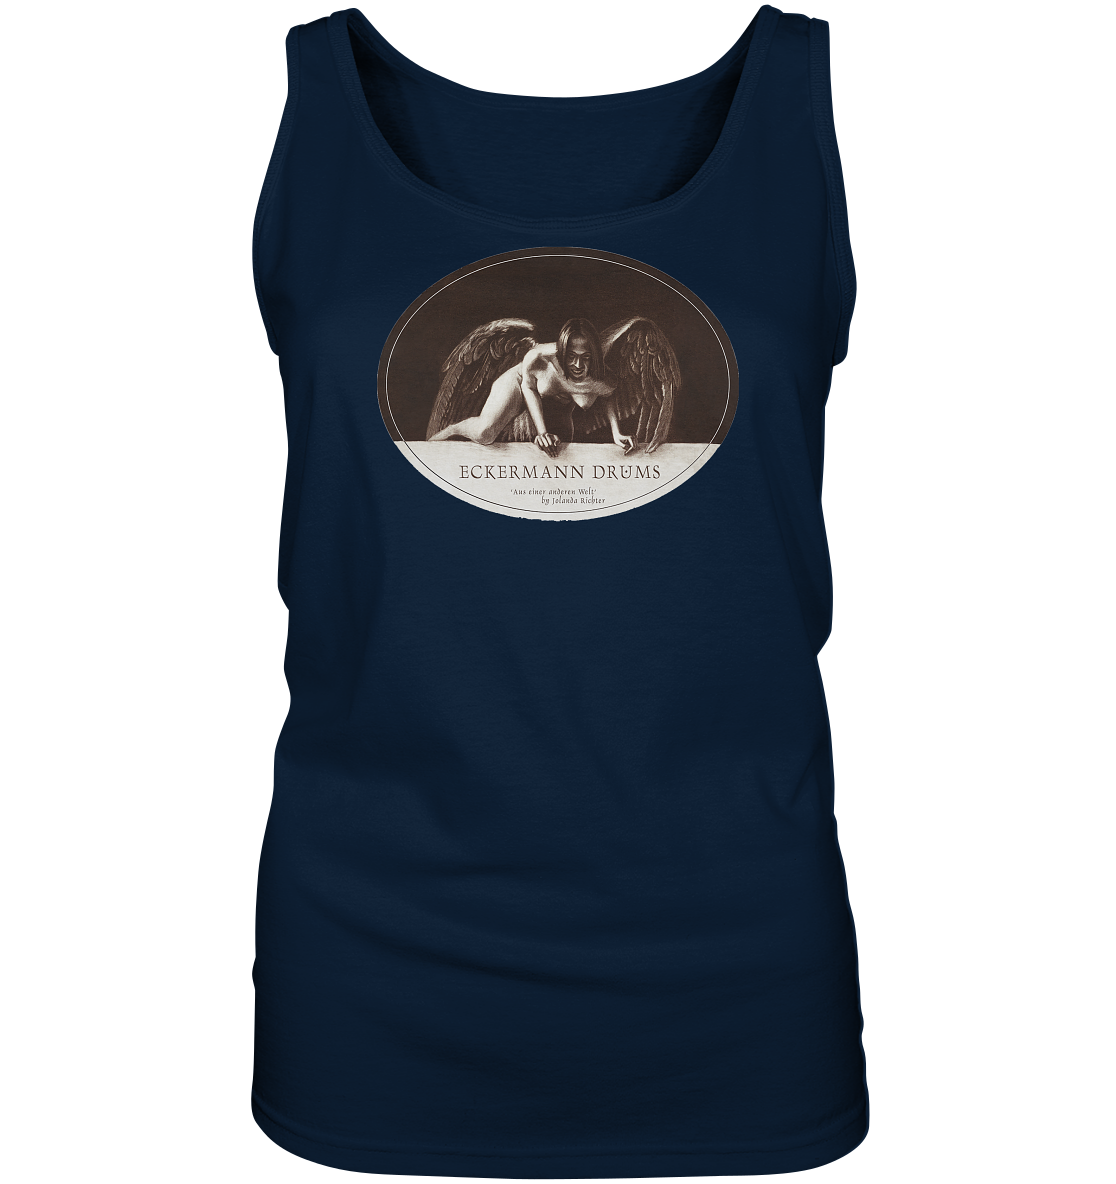 Eckermann DRUMS - "From Another World" - Ladies Tank-Top